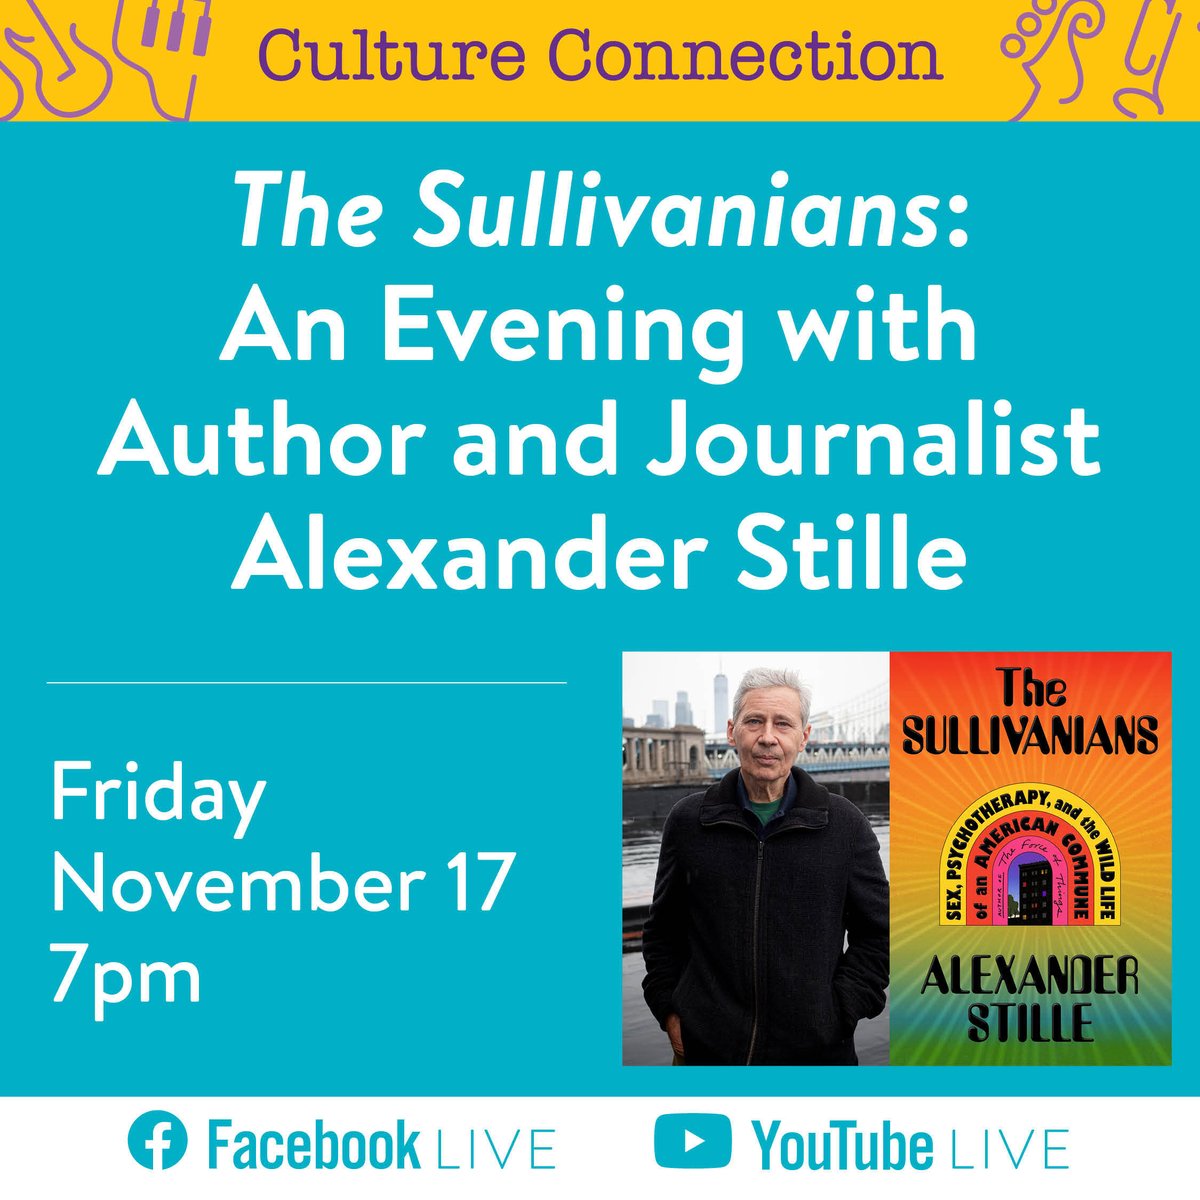 Join us for our Culture Connection conversation with journalist @a_stille, author of 'The Sullivanians: Sex, Psychotherapy, and the Wild Life of an American Commune,' on Friday, Nov. 17 at 7PM. facebook.com/QPLNYC/videos youtube.com/live/PLeThy_rU…